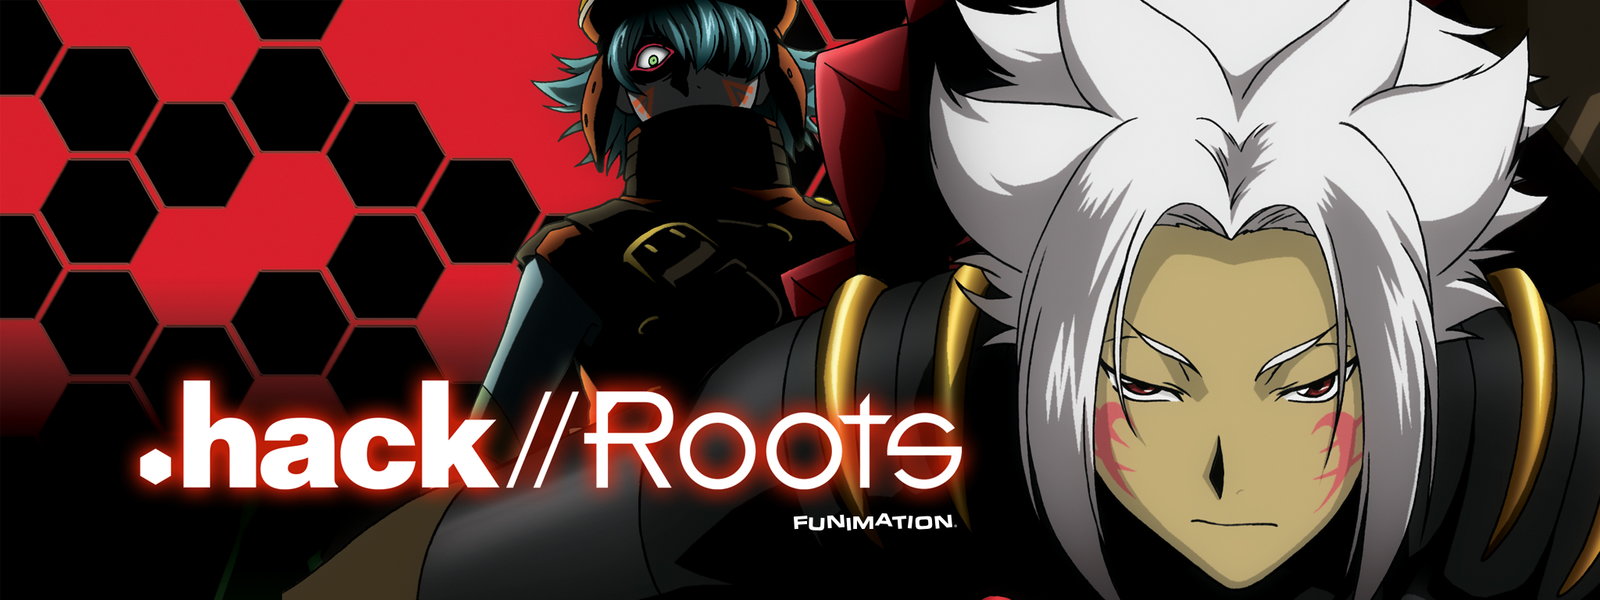 Hack Roots Wallpapers Anime Hq Hack Roots Pictures 4k Wallpapers 19